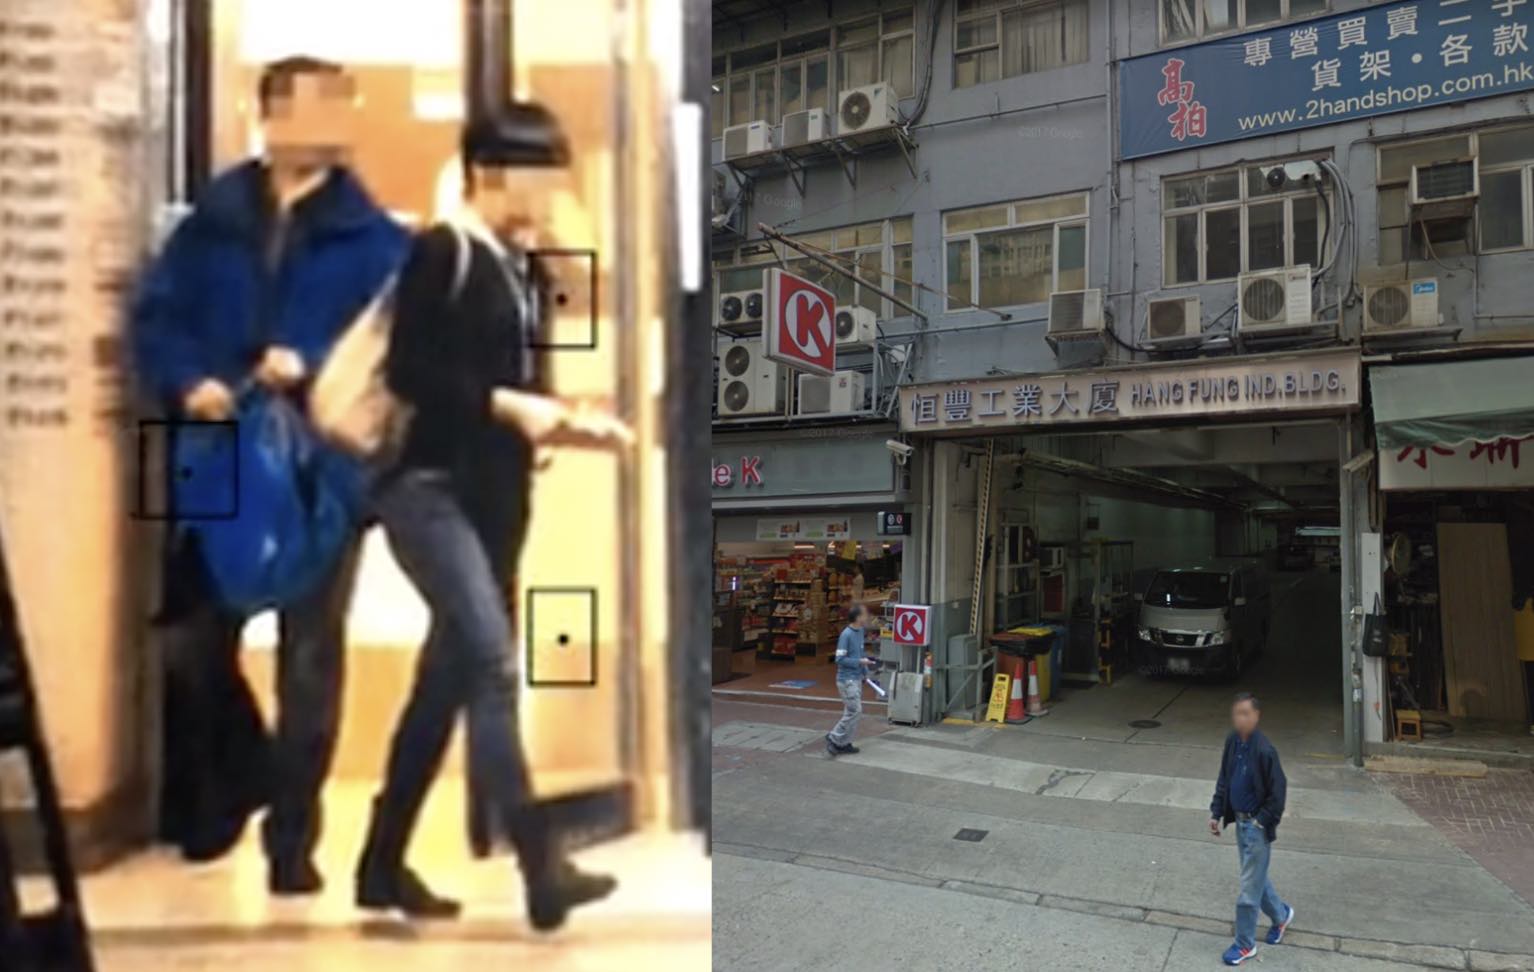 (Left) Photograph by a private investigator show a police officer and his lover leaving a safe house from a unit inside an industrial building in Hung Hom. The lovers are alleged to have used the safe house for trysts. (Right) the industrial building in Hung Hom where the safe house is located. Screengrabs via Apple Daily video and Google Maps.